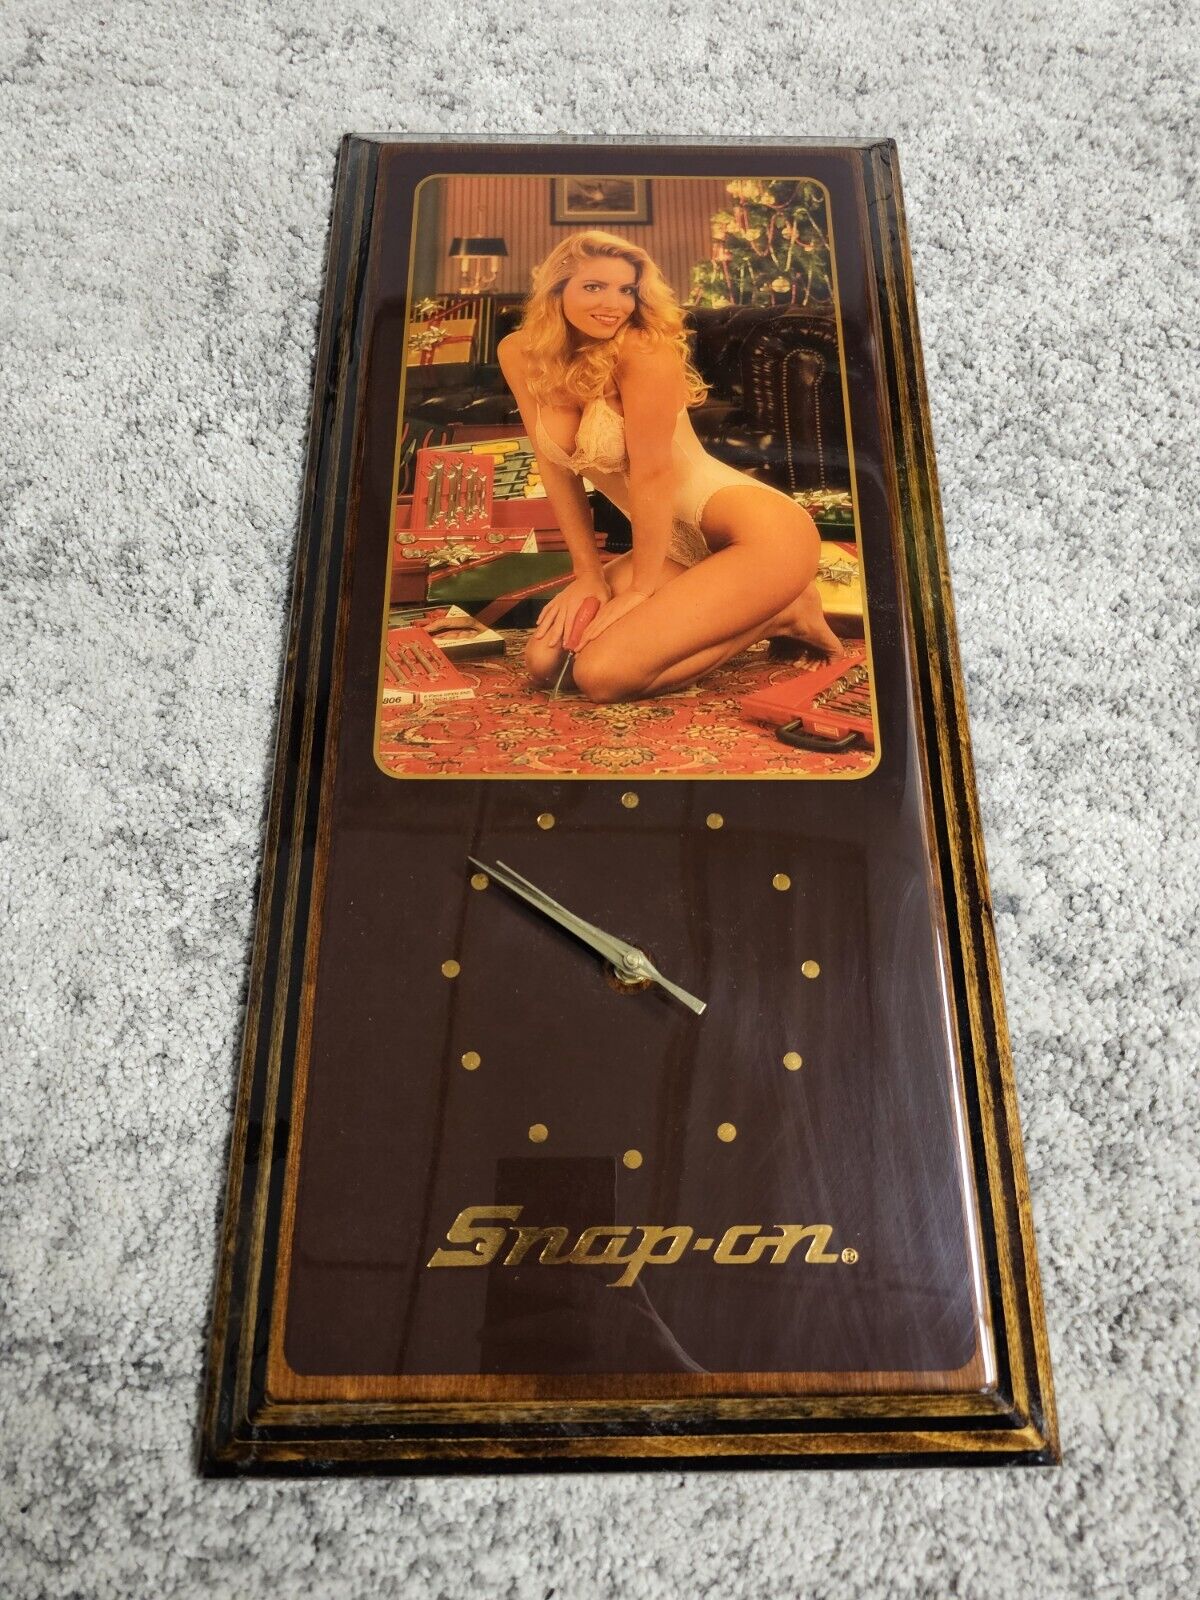 VTG SNAP-ON TOOLS LINGERIE PINUP GIRL WALL CLOCK SIGN 80's Christmas Jebco